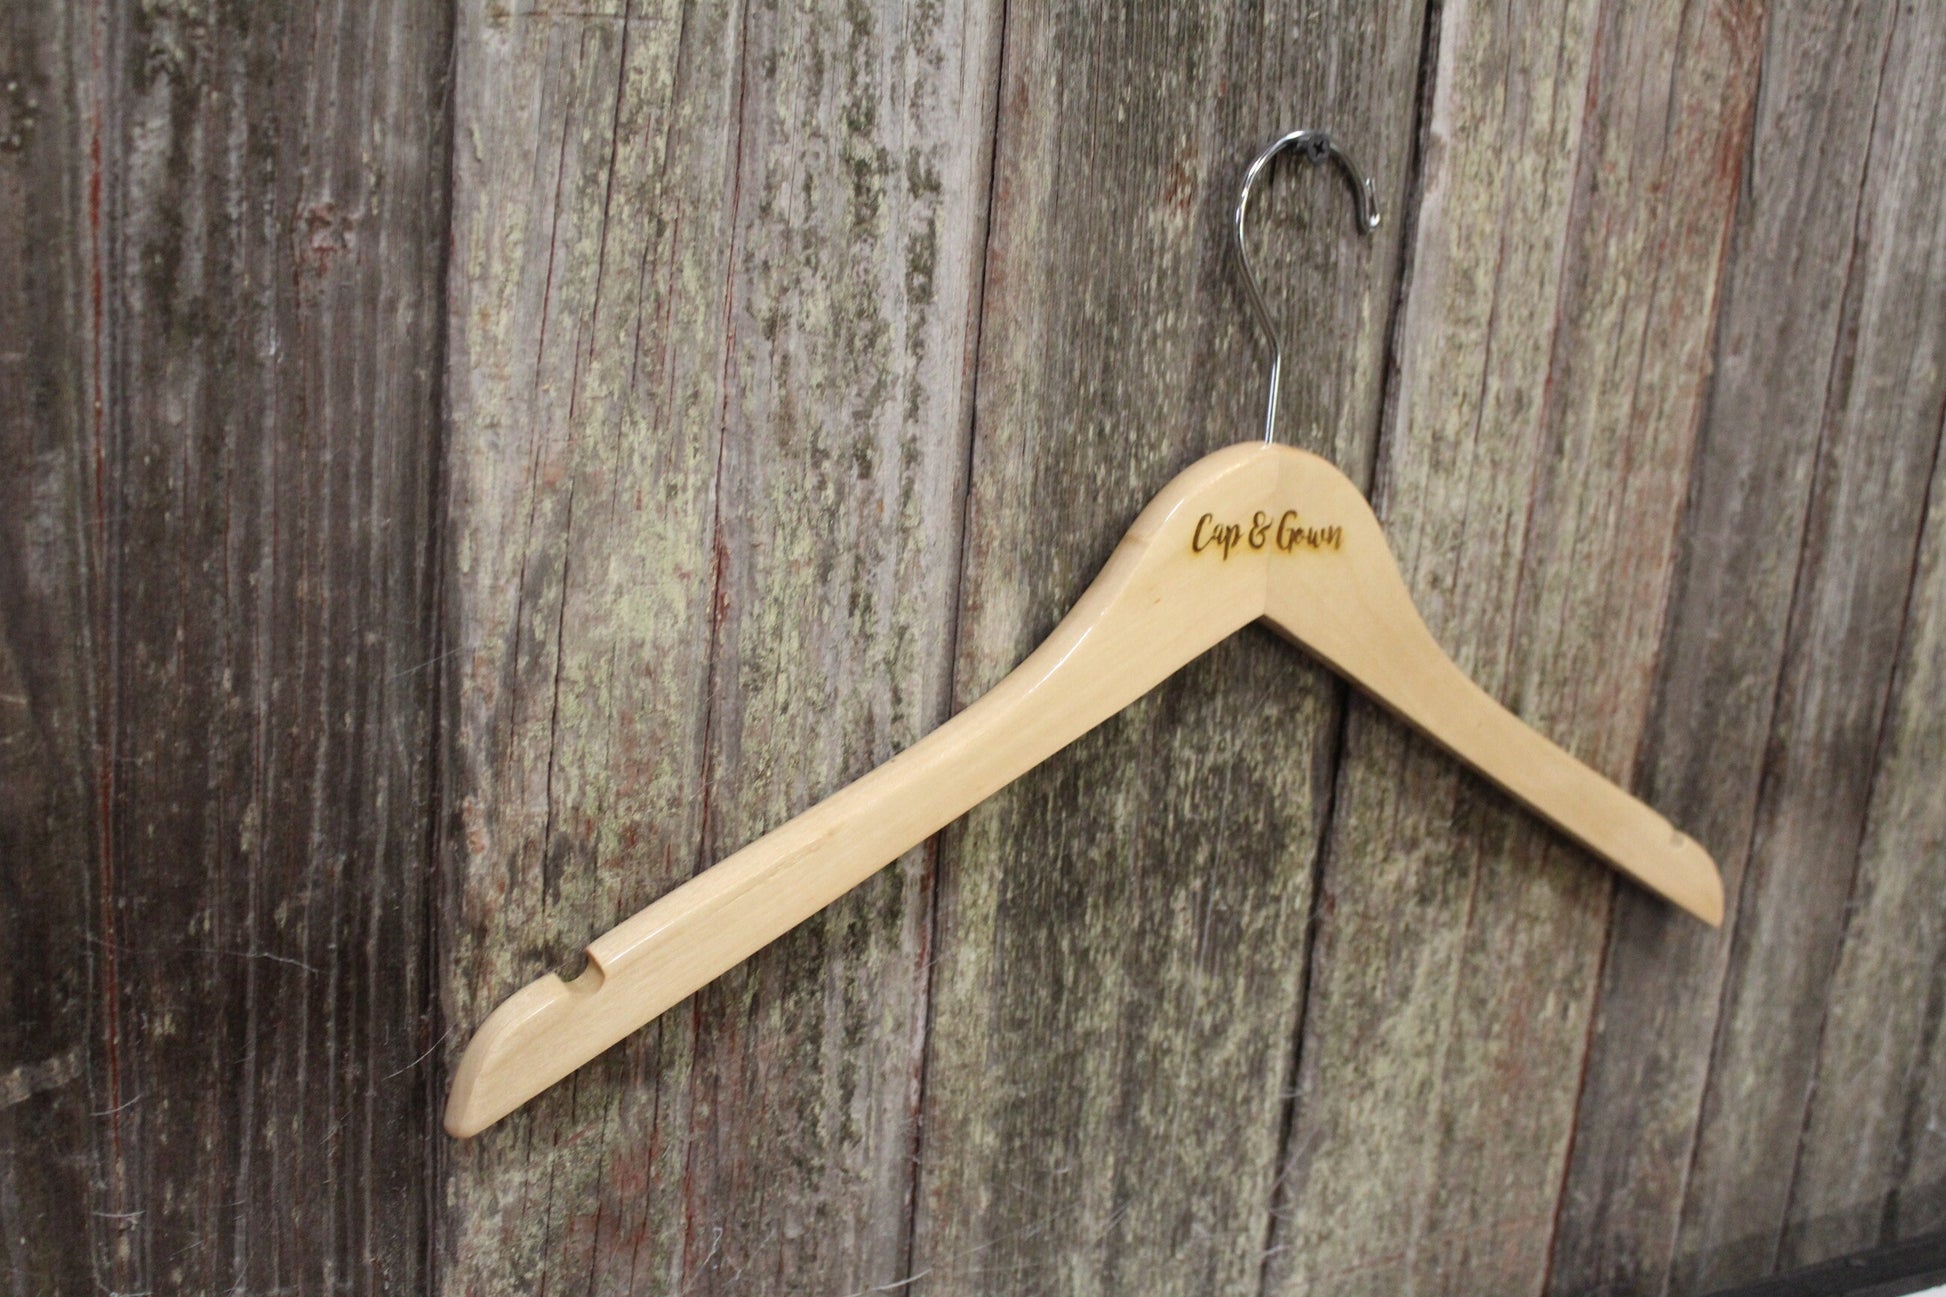 Cap and Gown Graduation Clothes Hanger Engraved Hard Wood Sturdy Dress Suit High School Ceremony Celebration